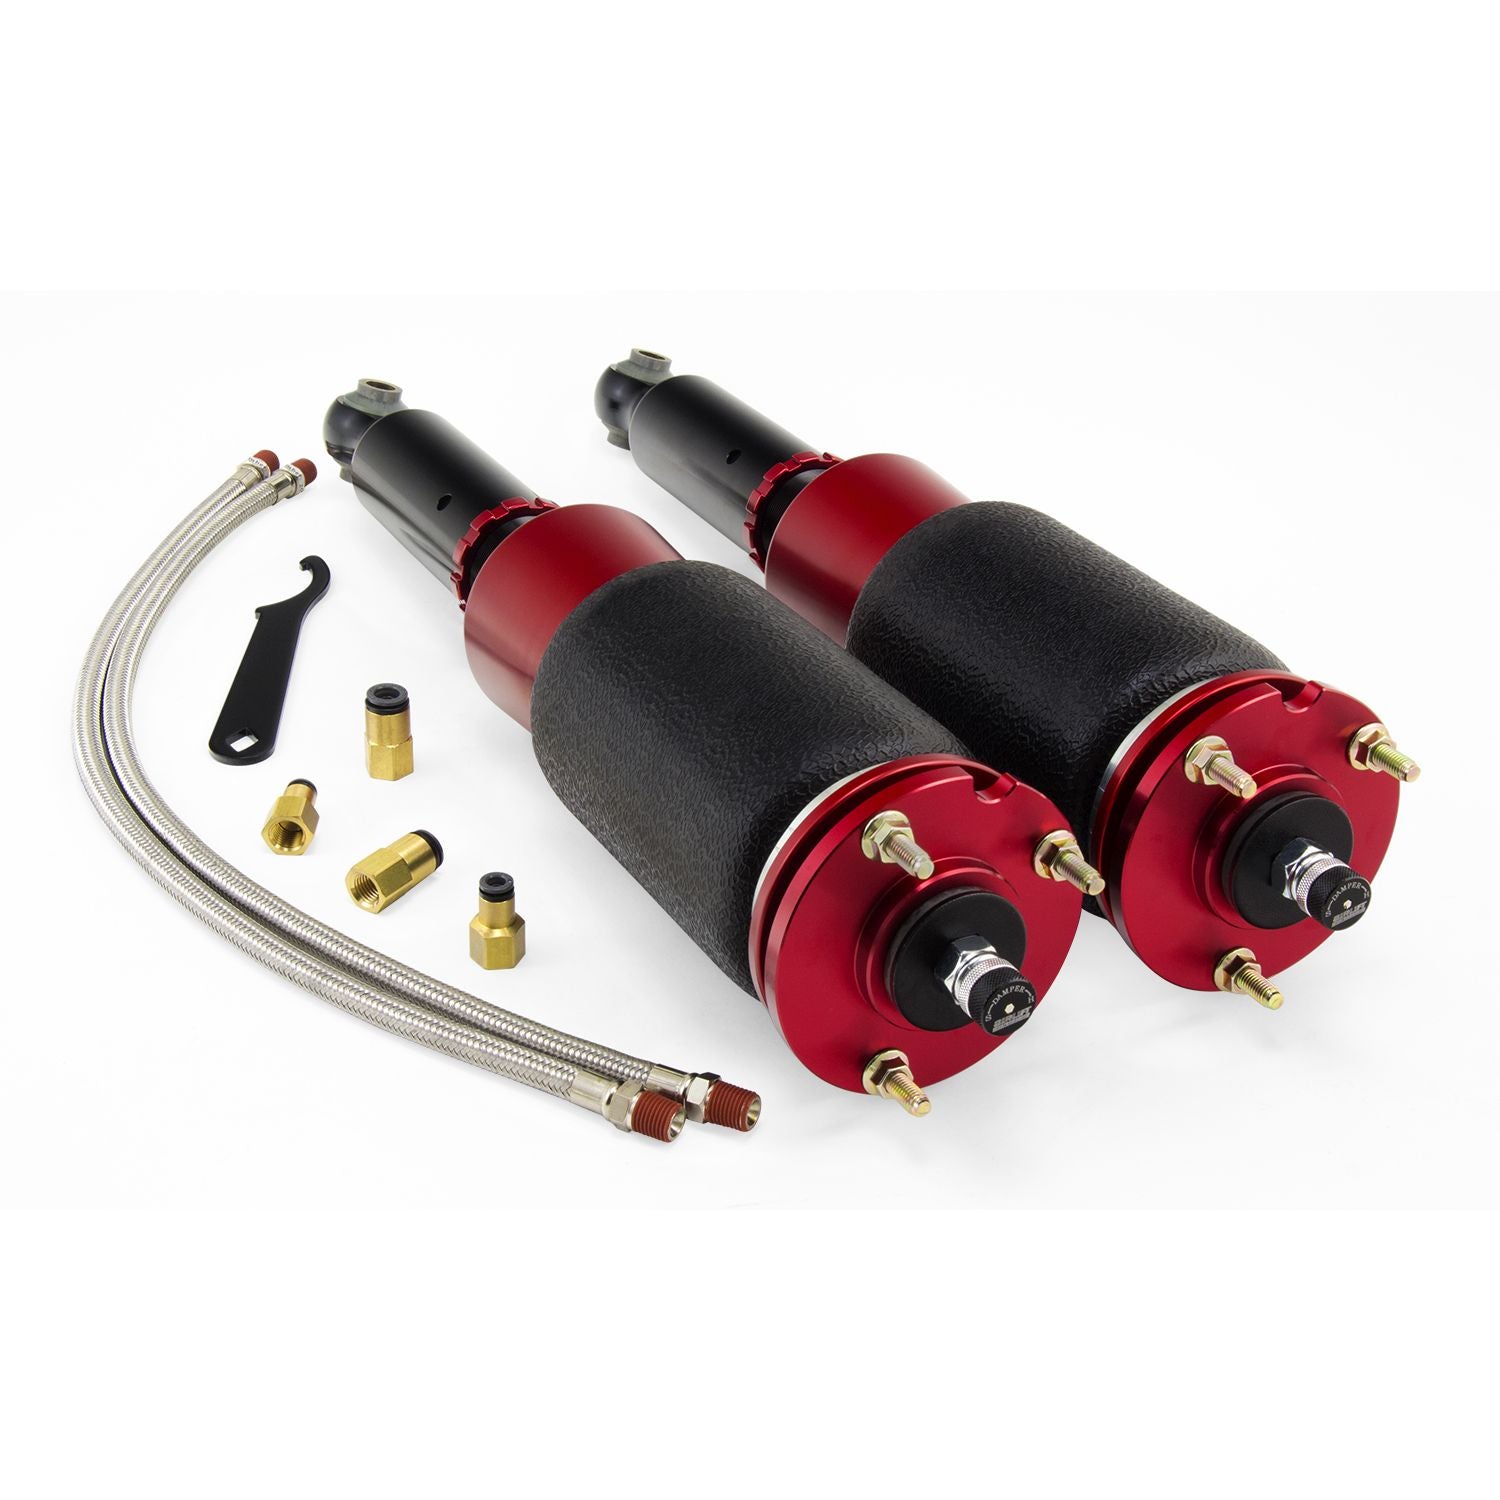 Progressive rate sleeve style air spring over 30-level adjustable monotube threaded body shock with independent height adjustment. Rubber isolated upper mount made of T6061 red anodized aluminum.